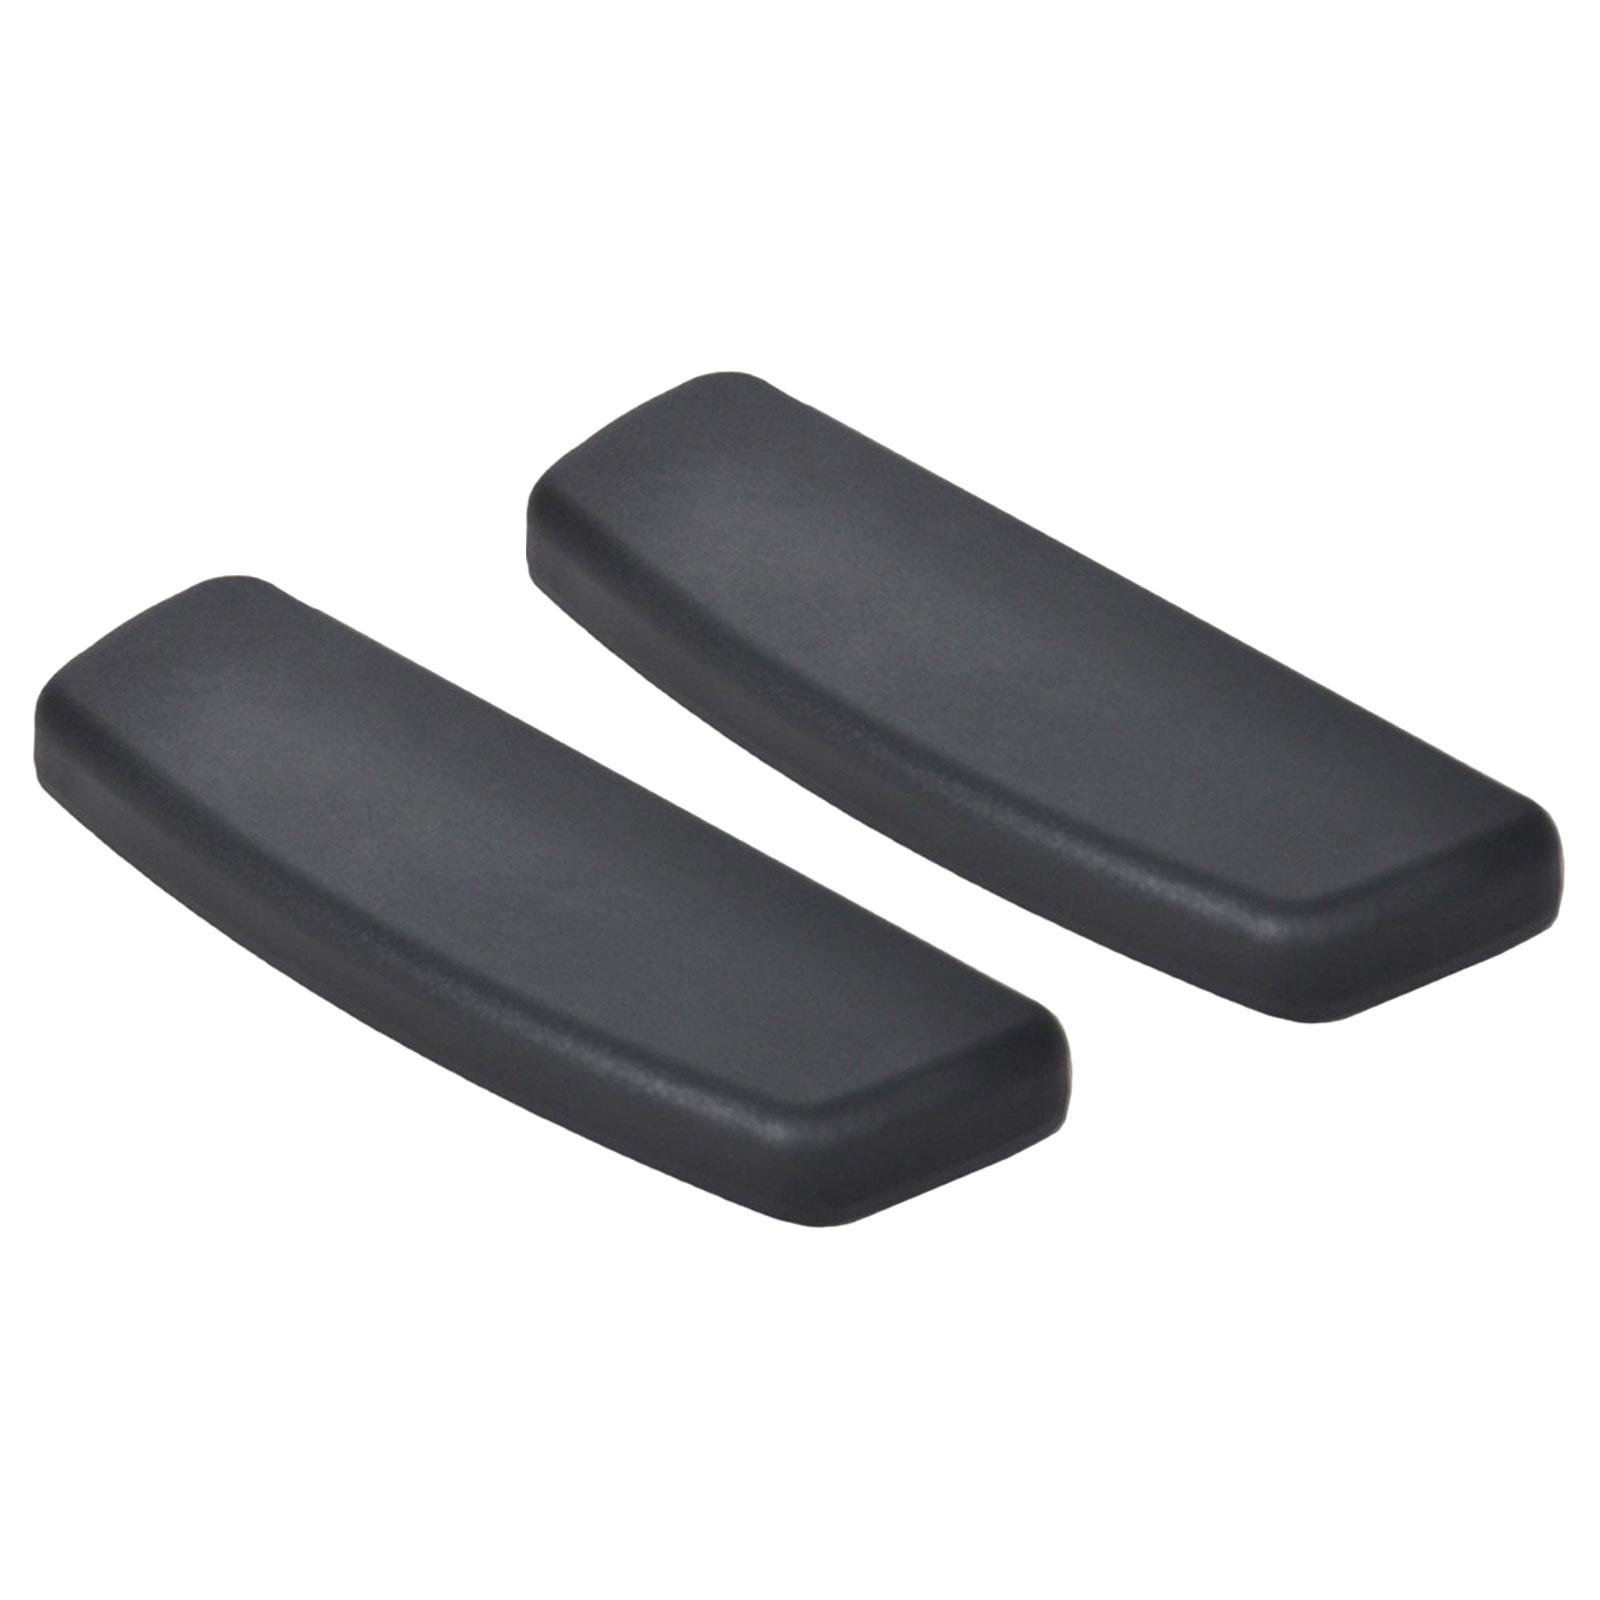 2 Pieces Office Chair Replacement Arm Pads, Office Chair Parts, Chair Arm Cushion Pad Gaming Chair Armrest Pads for Armchair - image 5 of 9